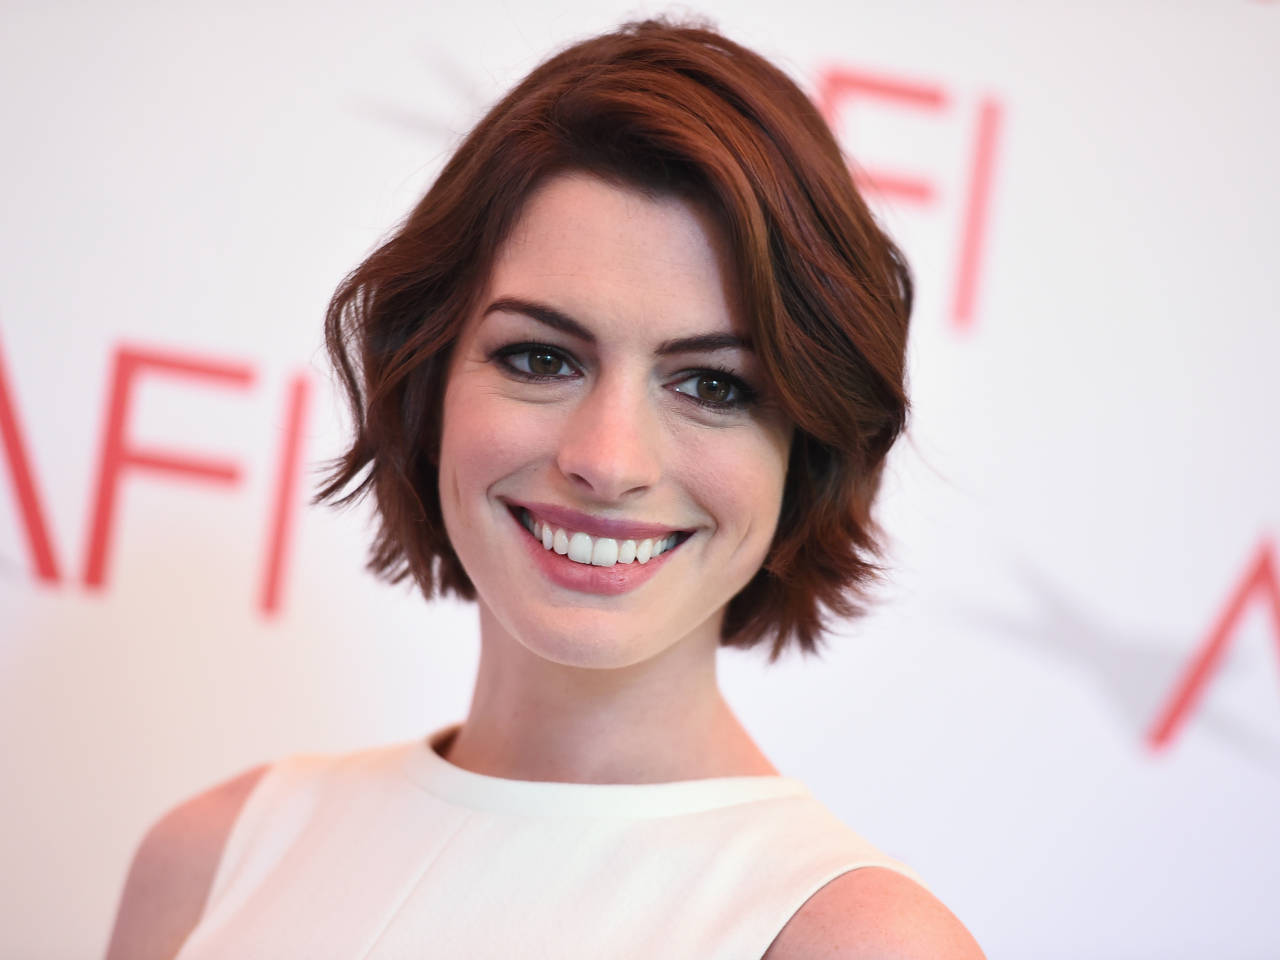 HQ Anne Hathaway Wallpapers | File 79.52Kb